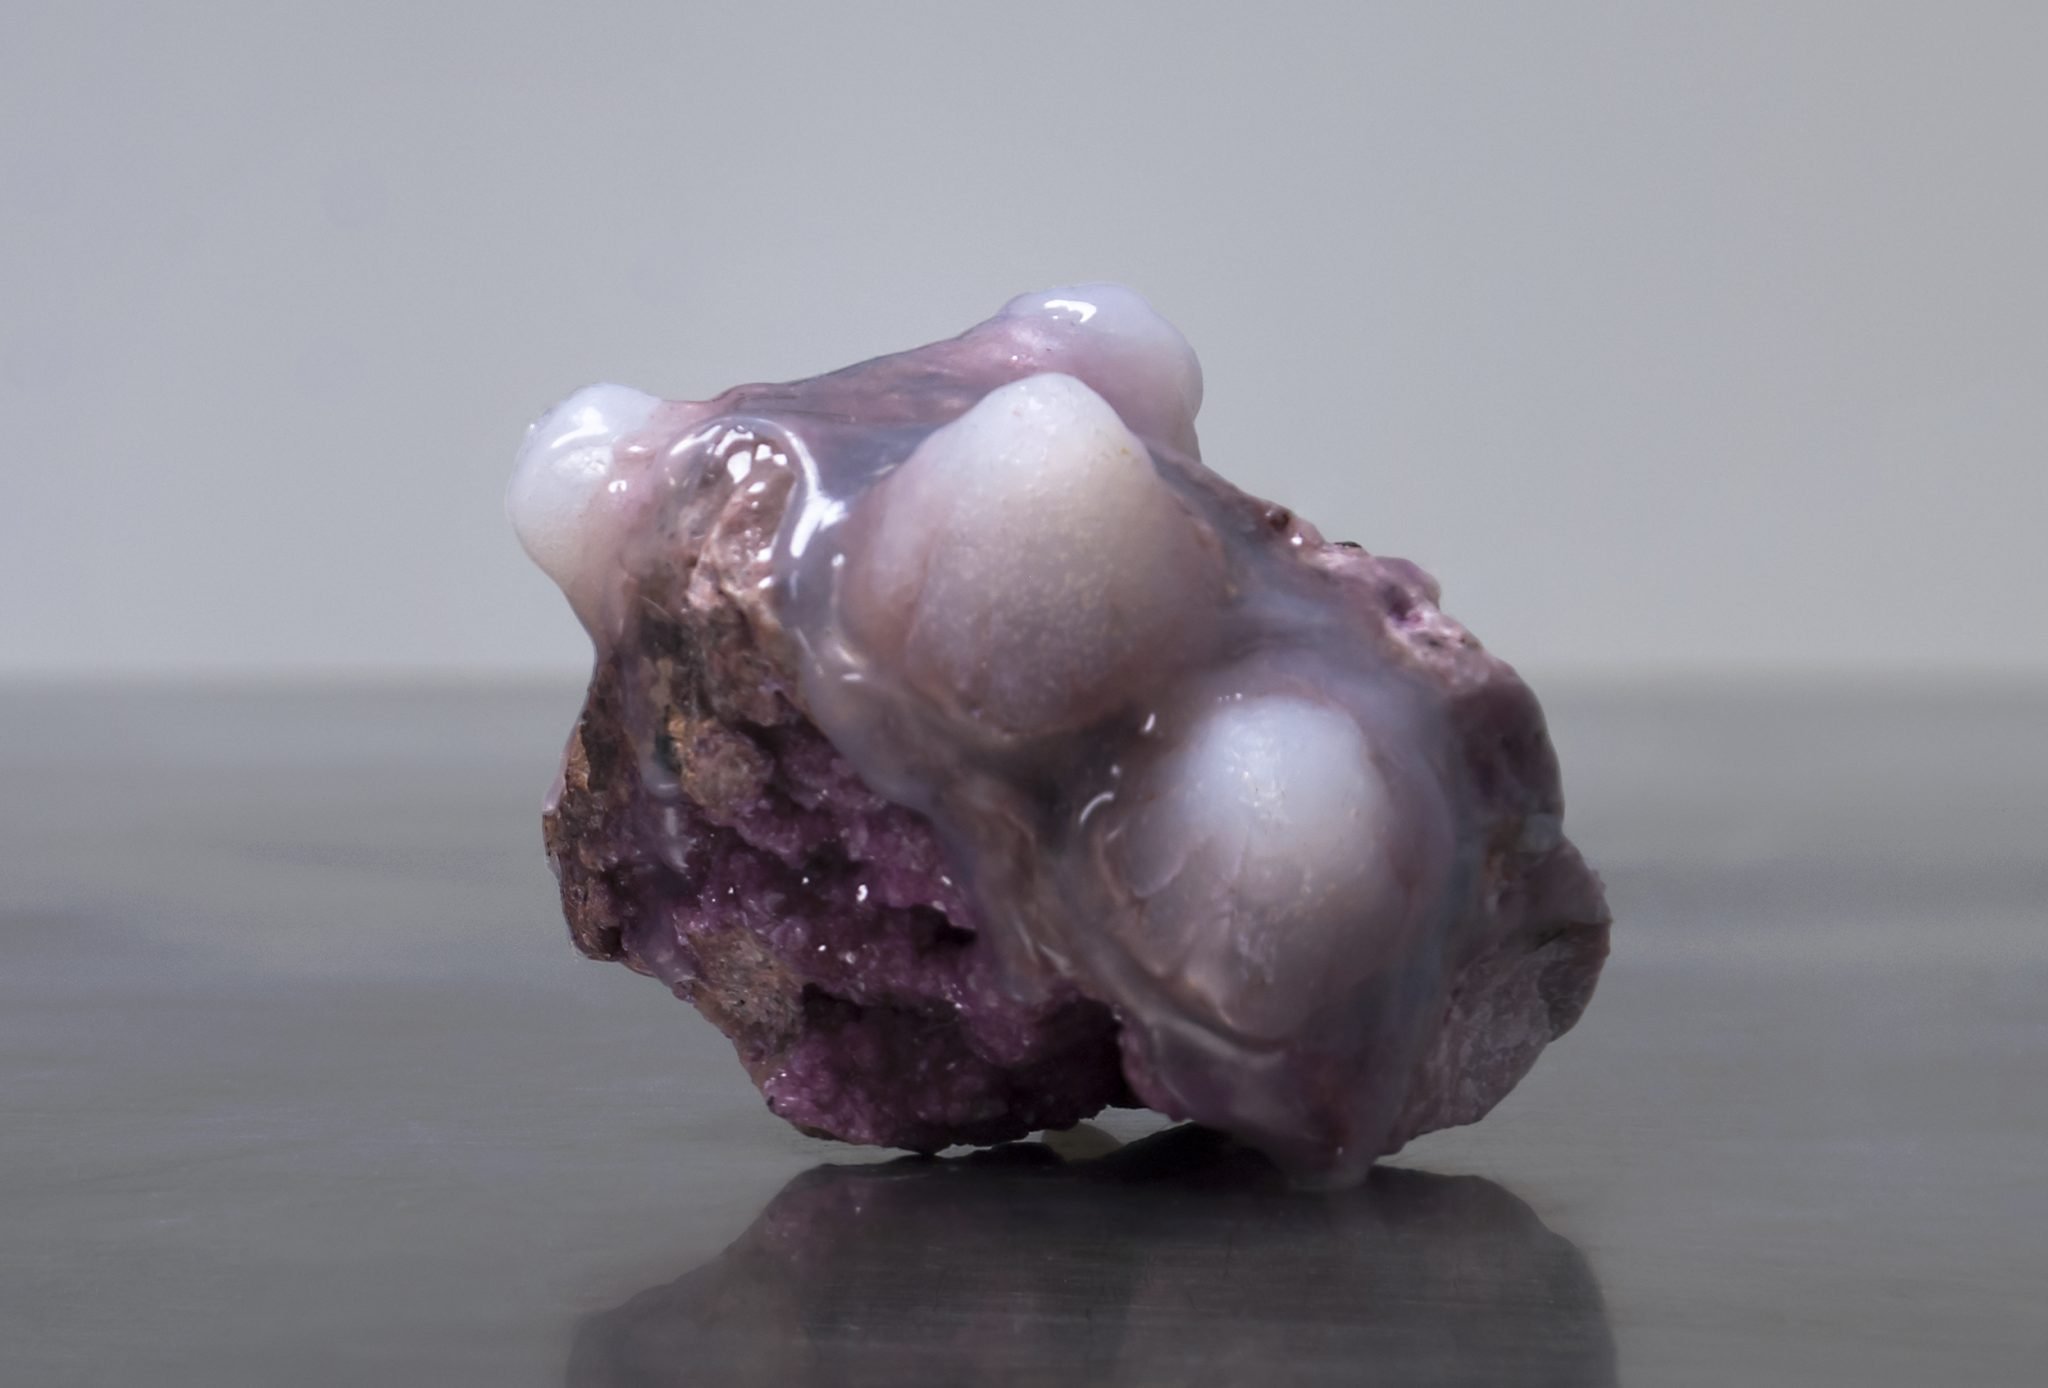 Margaux Crump, Rock Hard, sex-safe silicone, Cobaltoan calcite (a mineral historically consumed as an aphrodisiac), and makeup pigments